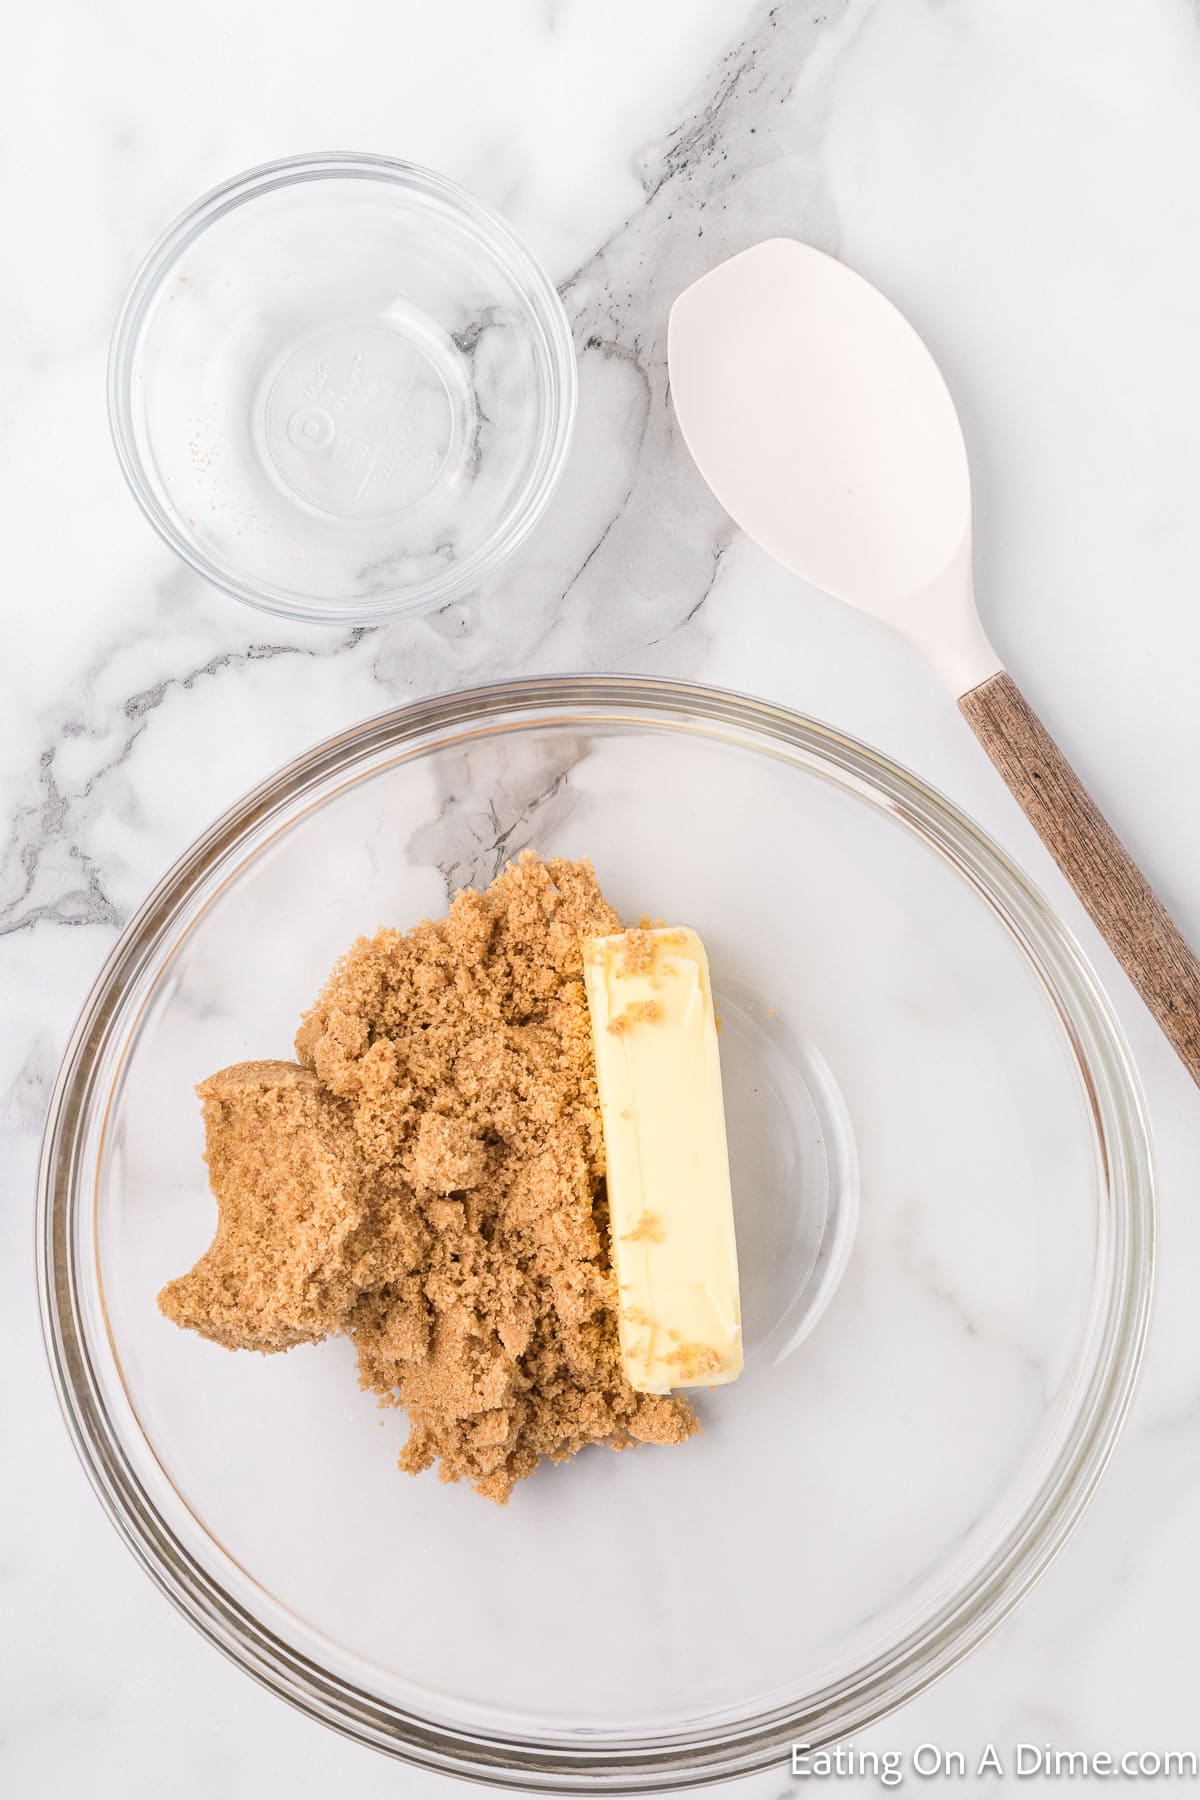 A clear glass bowl holds a stick of butter and brown sugar on a marble countertop, essential ingredients for a delightful Chocolate Chip Cookie Cake Recipe. Nearby, an empty smaller glass bowl and a white mixing spoon with a wooden handle await their turn to join the baking process.